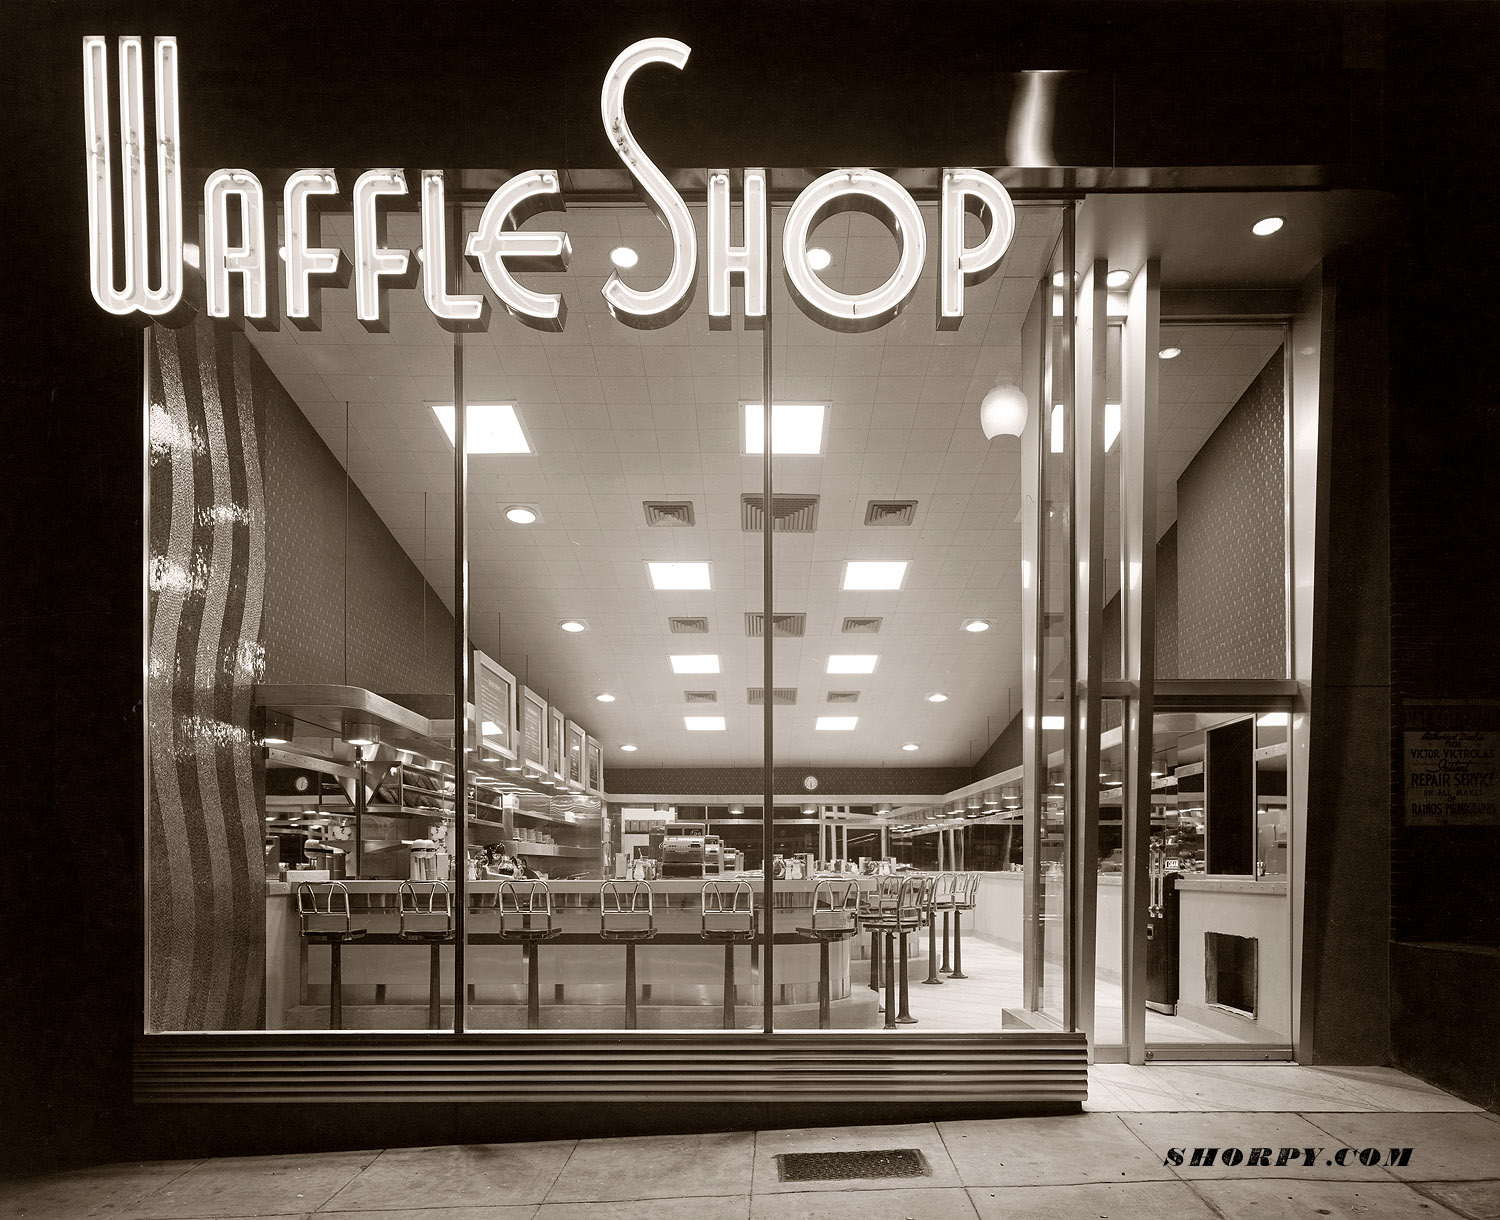 Entrance to the Waffle Shop at 522 10th Street NW, Washington D.C. Circa 1950 photograph by Theodor Horydczak. View full size.